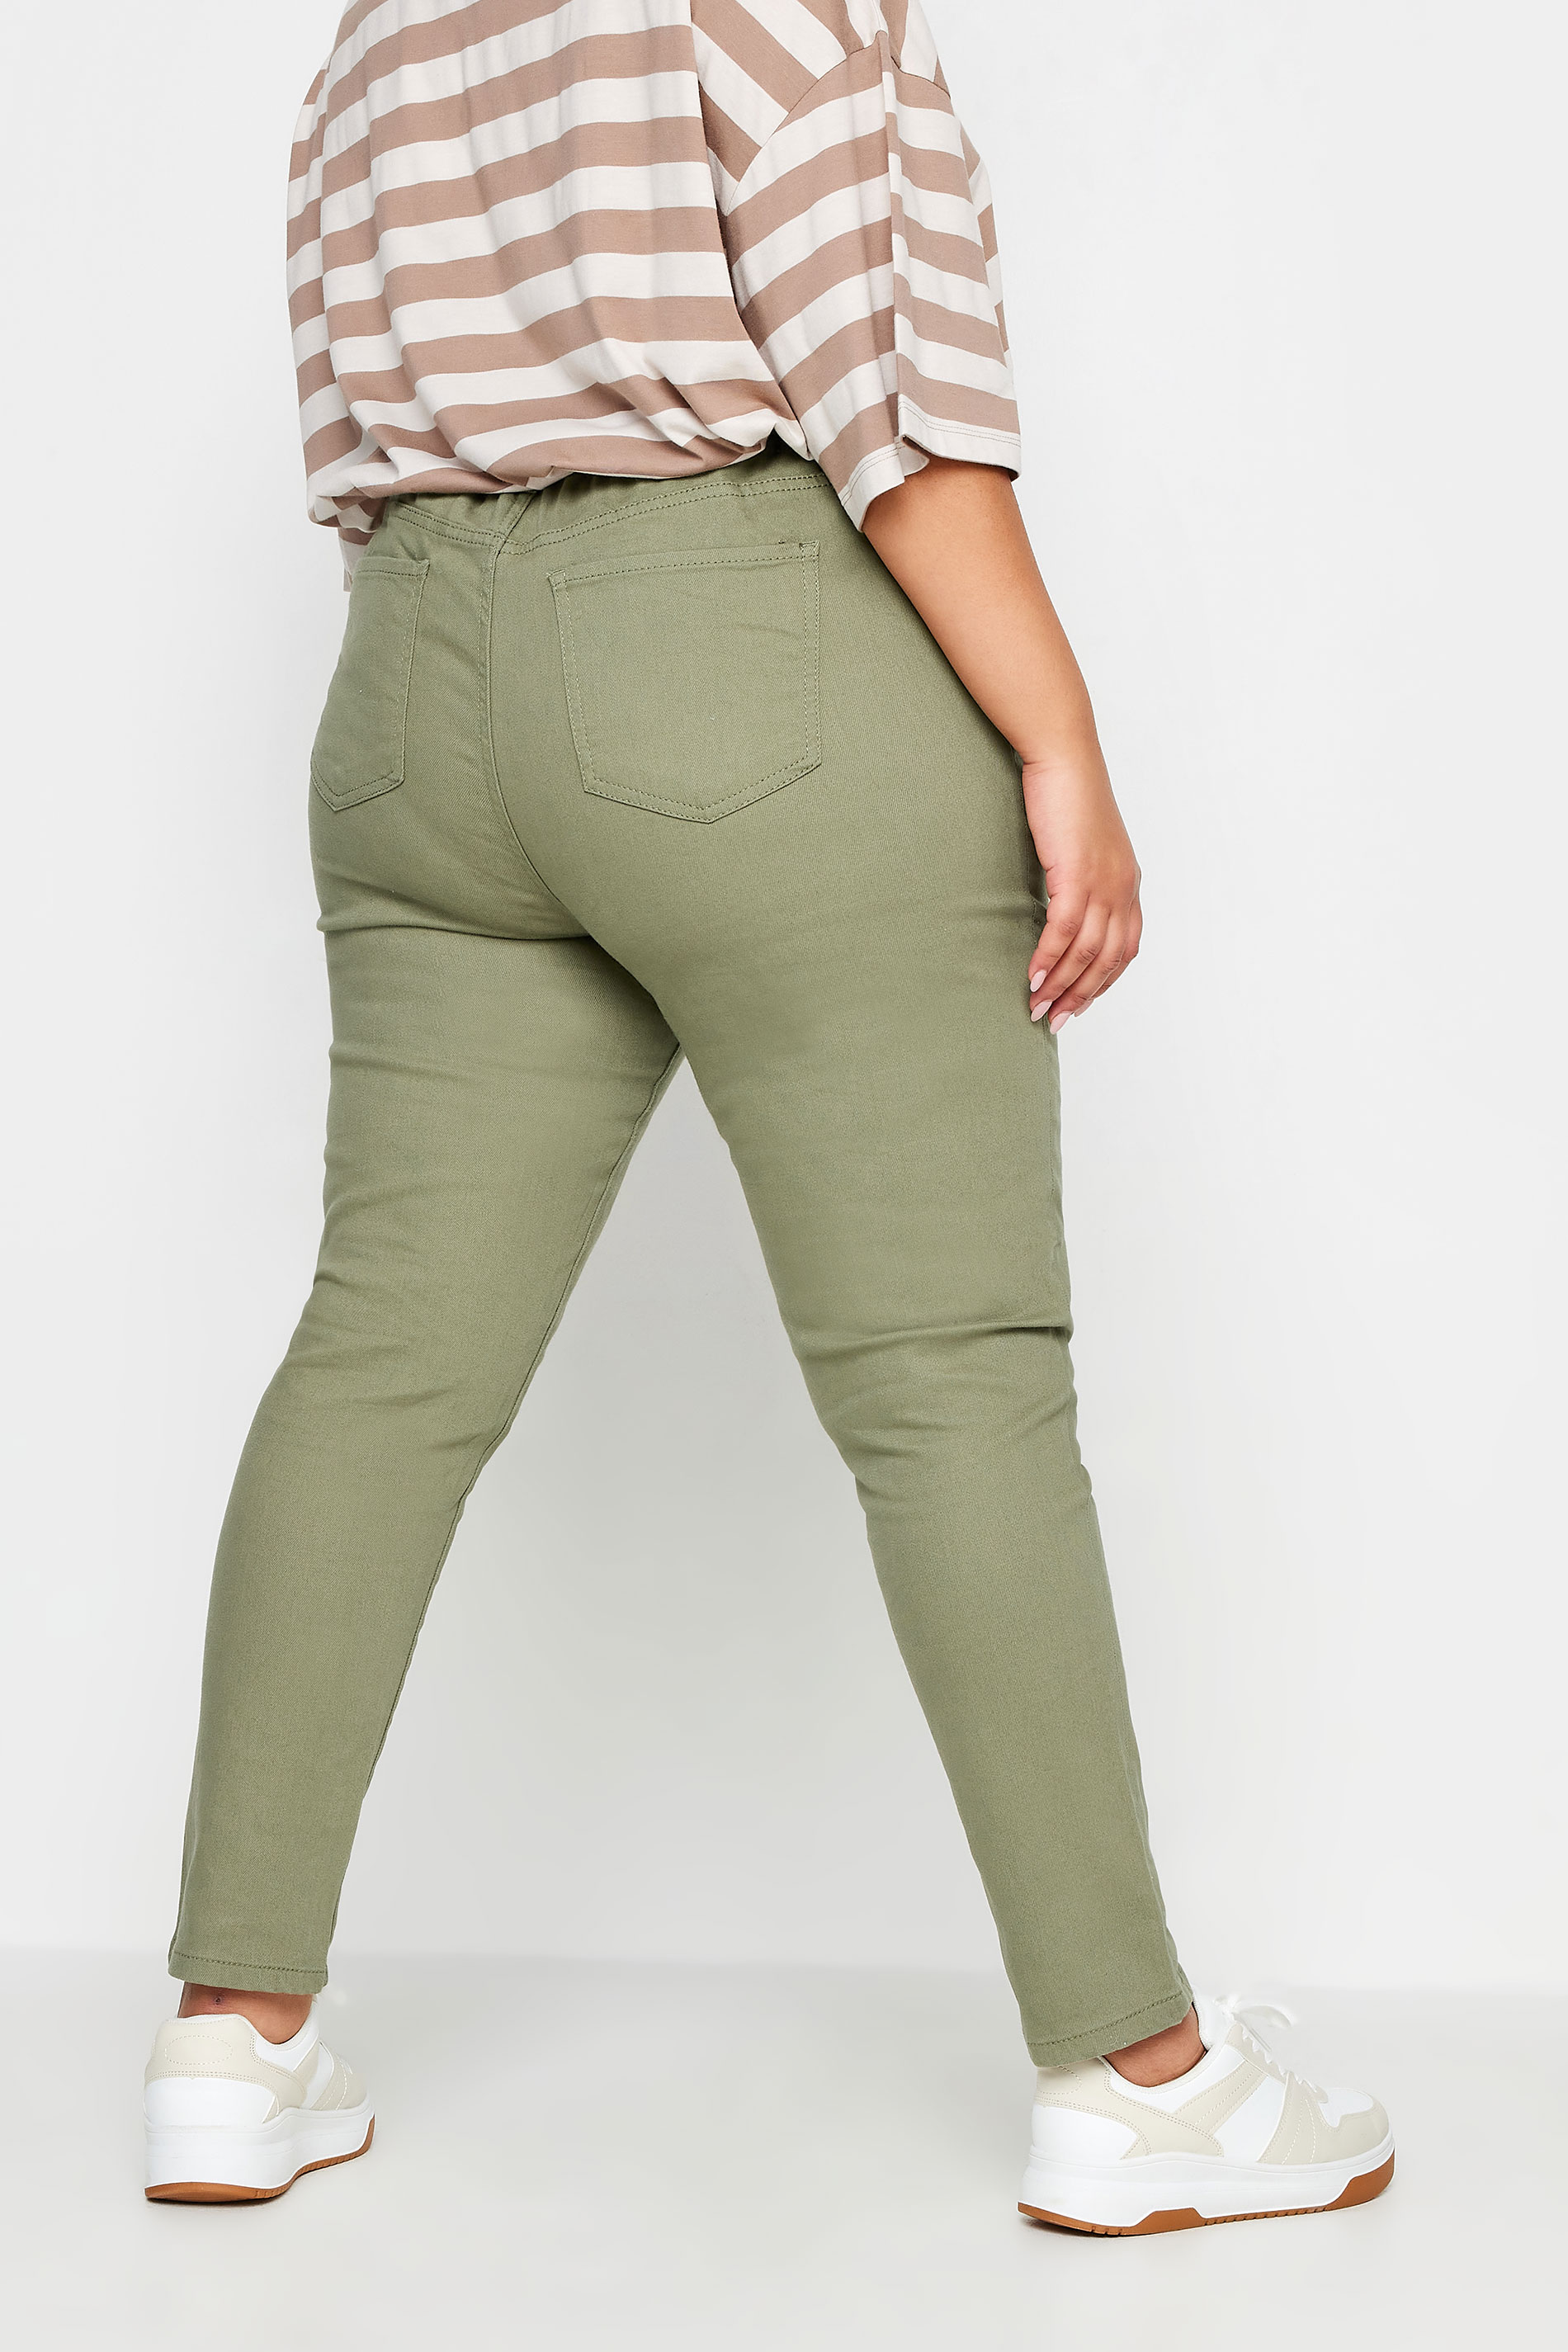 Plus Size Khaki Green Stretch Elasticated Waist MOM Jeans | Yours Clothing 3